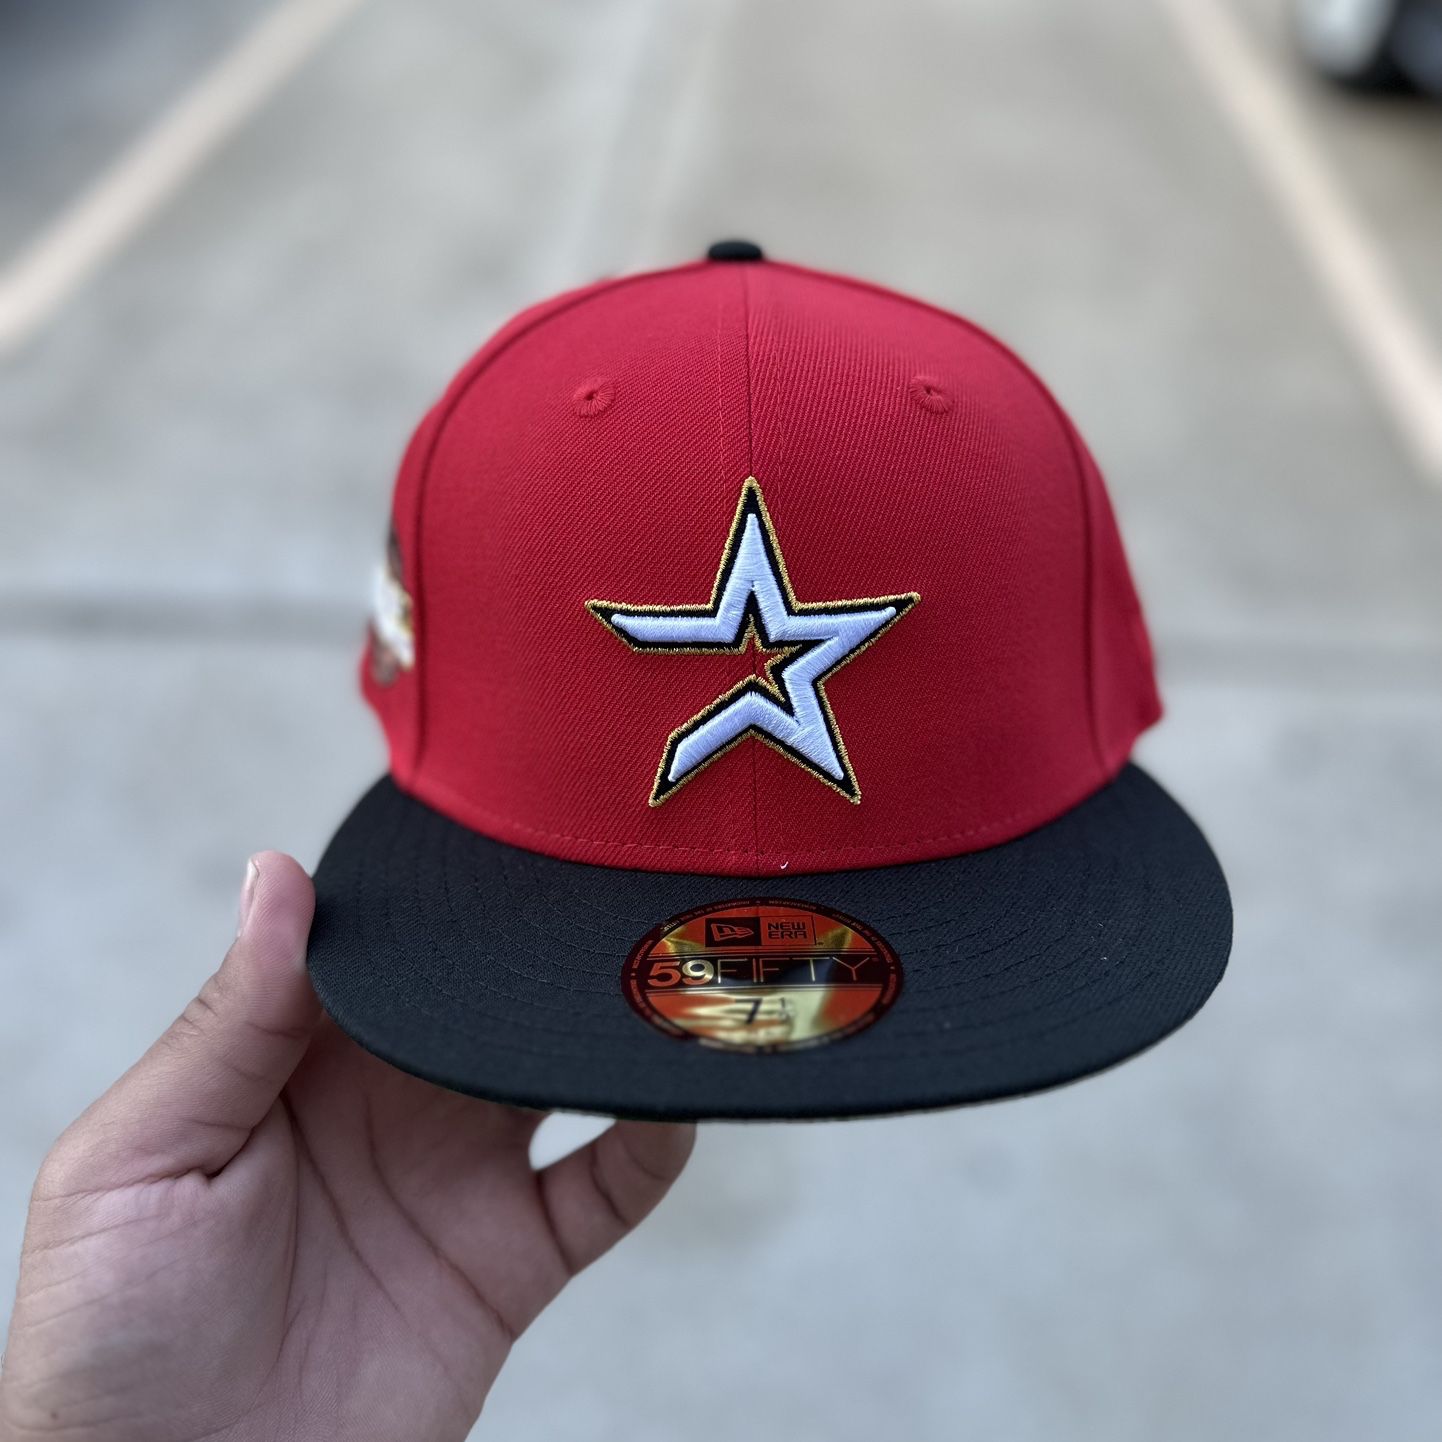 Houston Astros Fitted Hats for Sale in Houston, TX - OfferUp